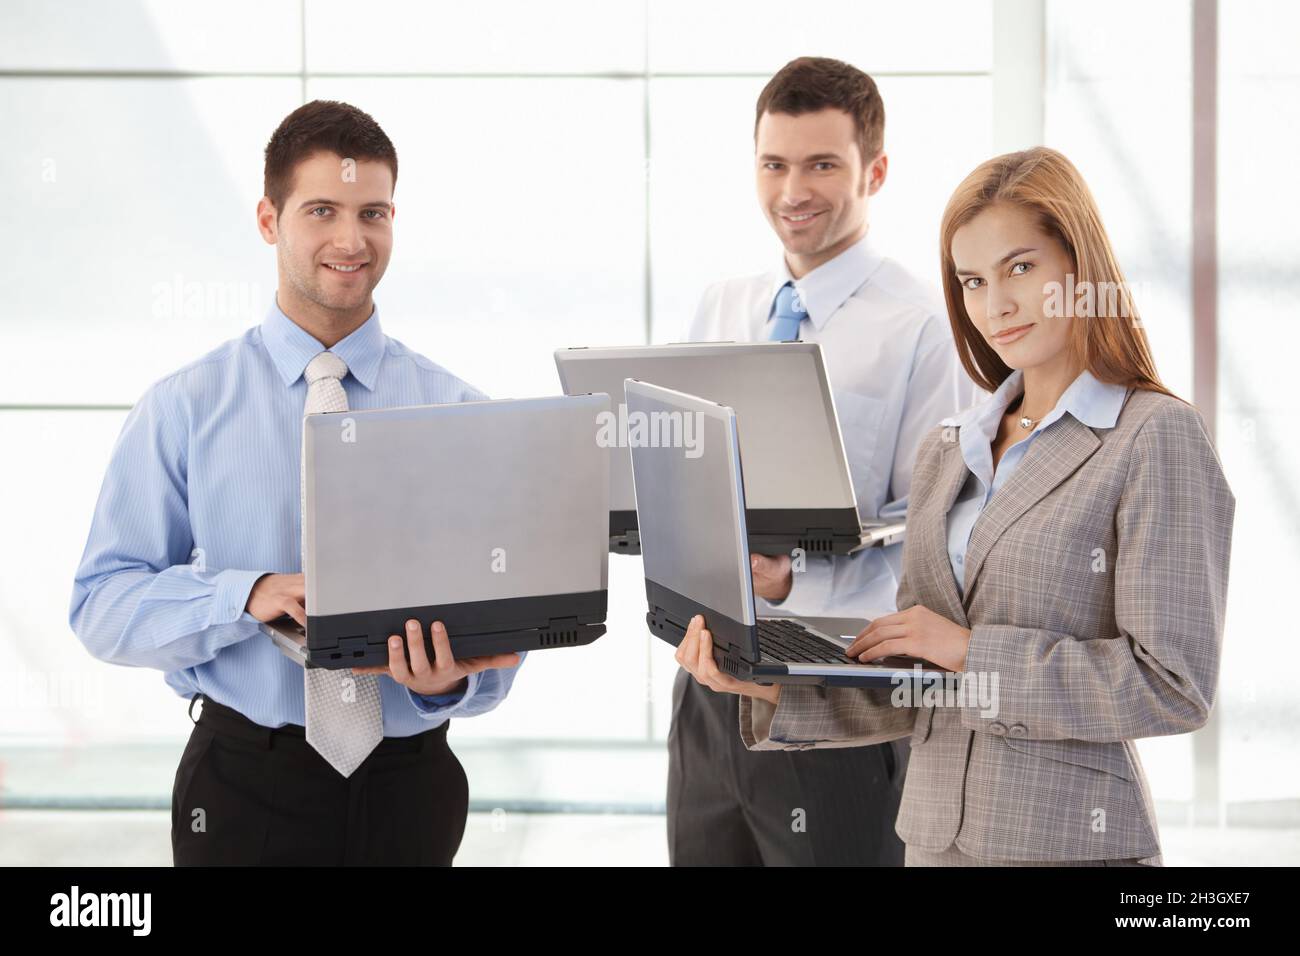 Confident businessteam working on laptop smiling Stock Photo